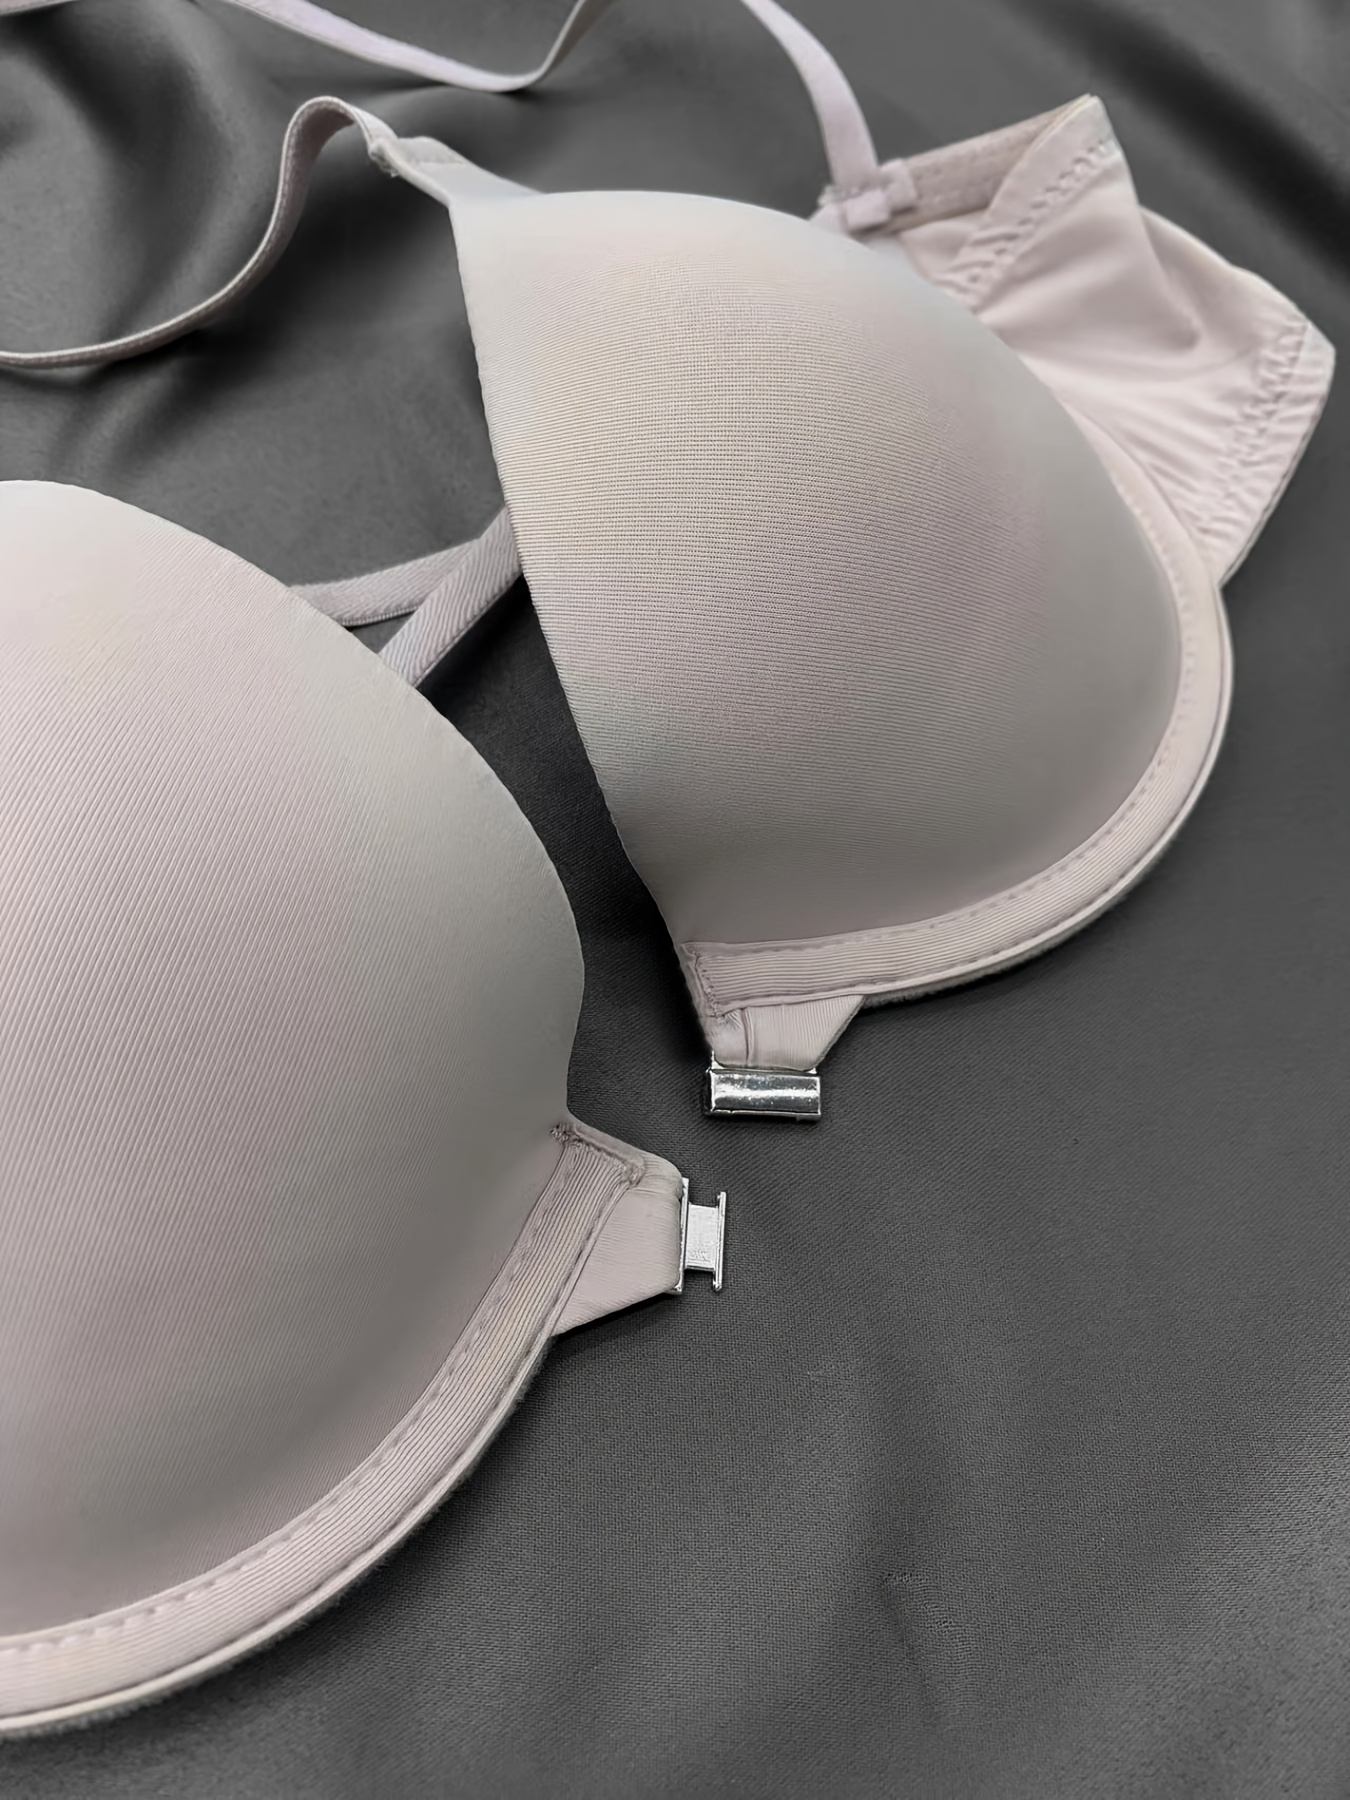 M J Online Shopping - new designs padded bra soft stuff. Size Available. 32,34,36,38,40  Price. 650/- Whatsapp. 03355137151